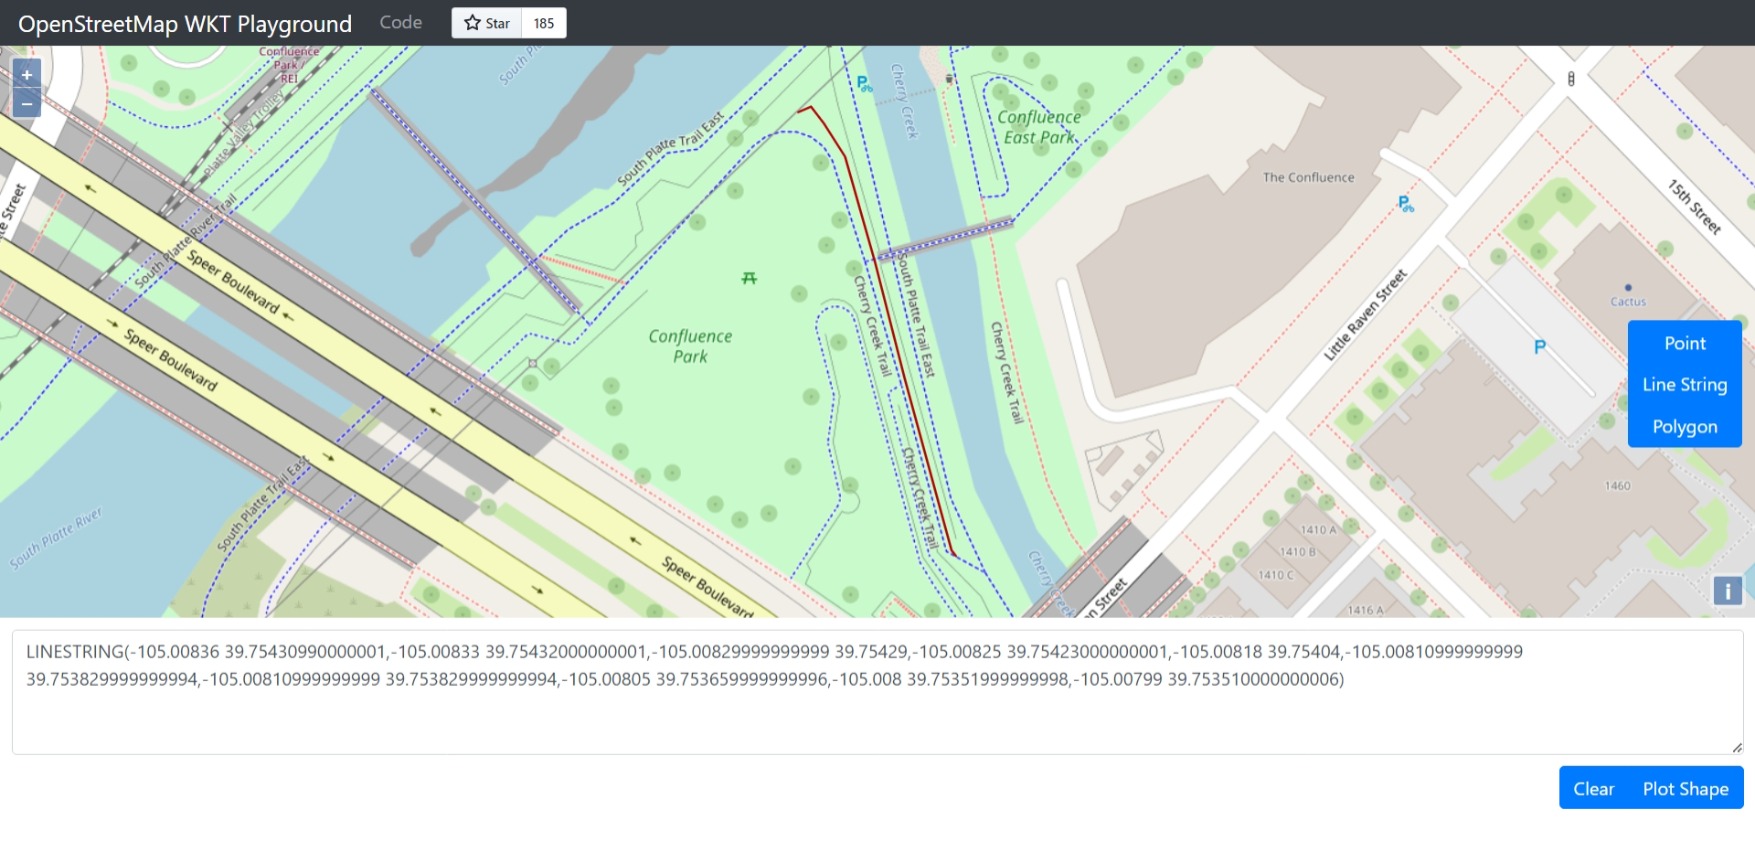 OpenStreetMap WKT Playground: 10 points with LINESTRING